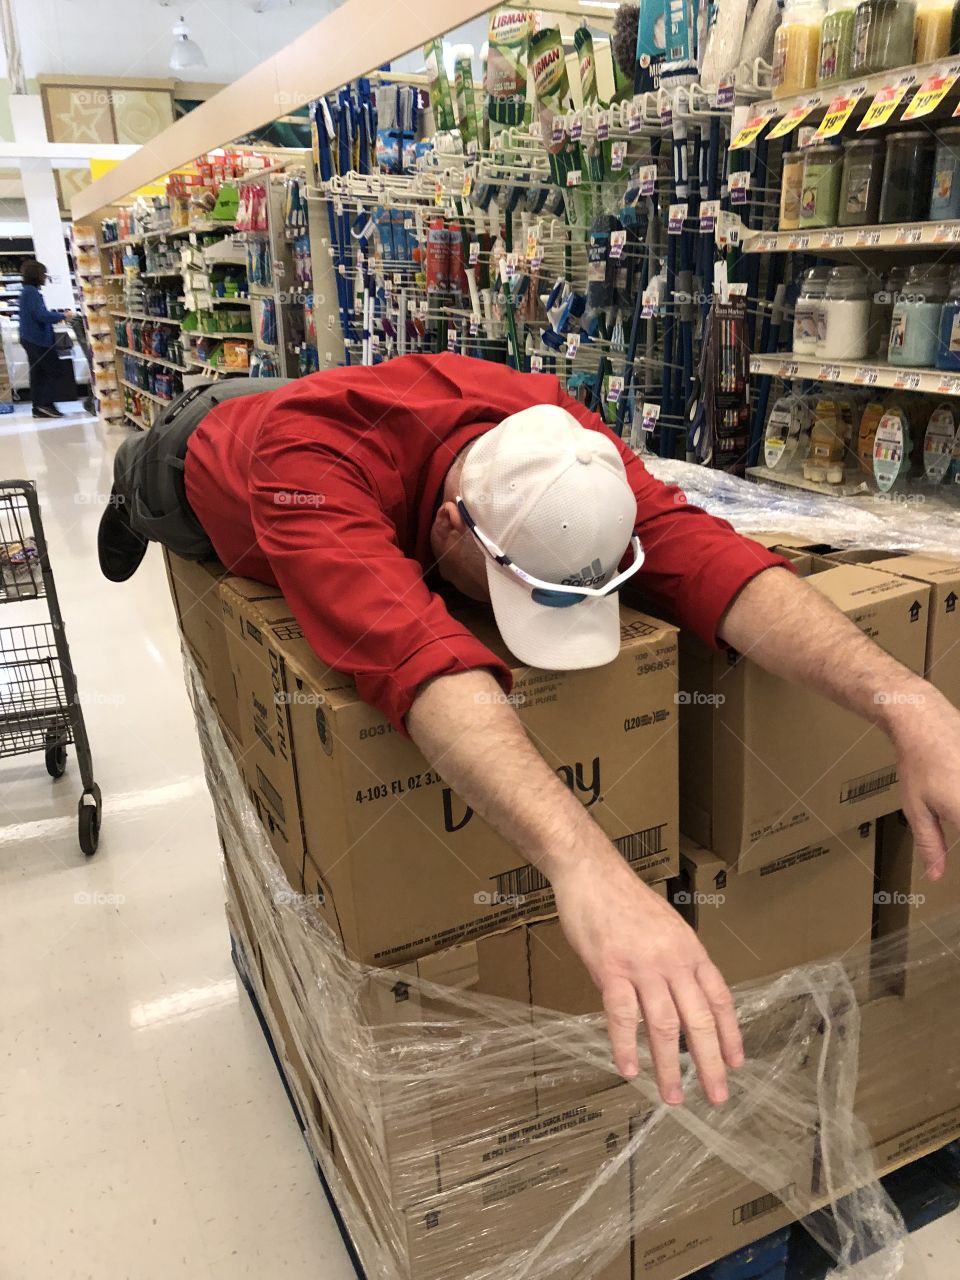 Too tired to shop anymore